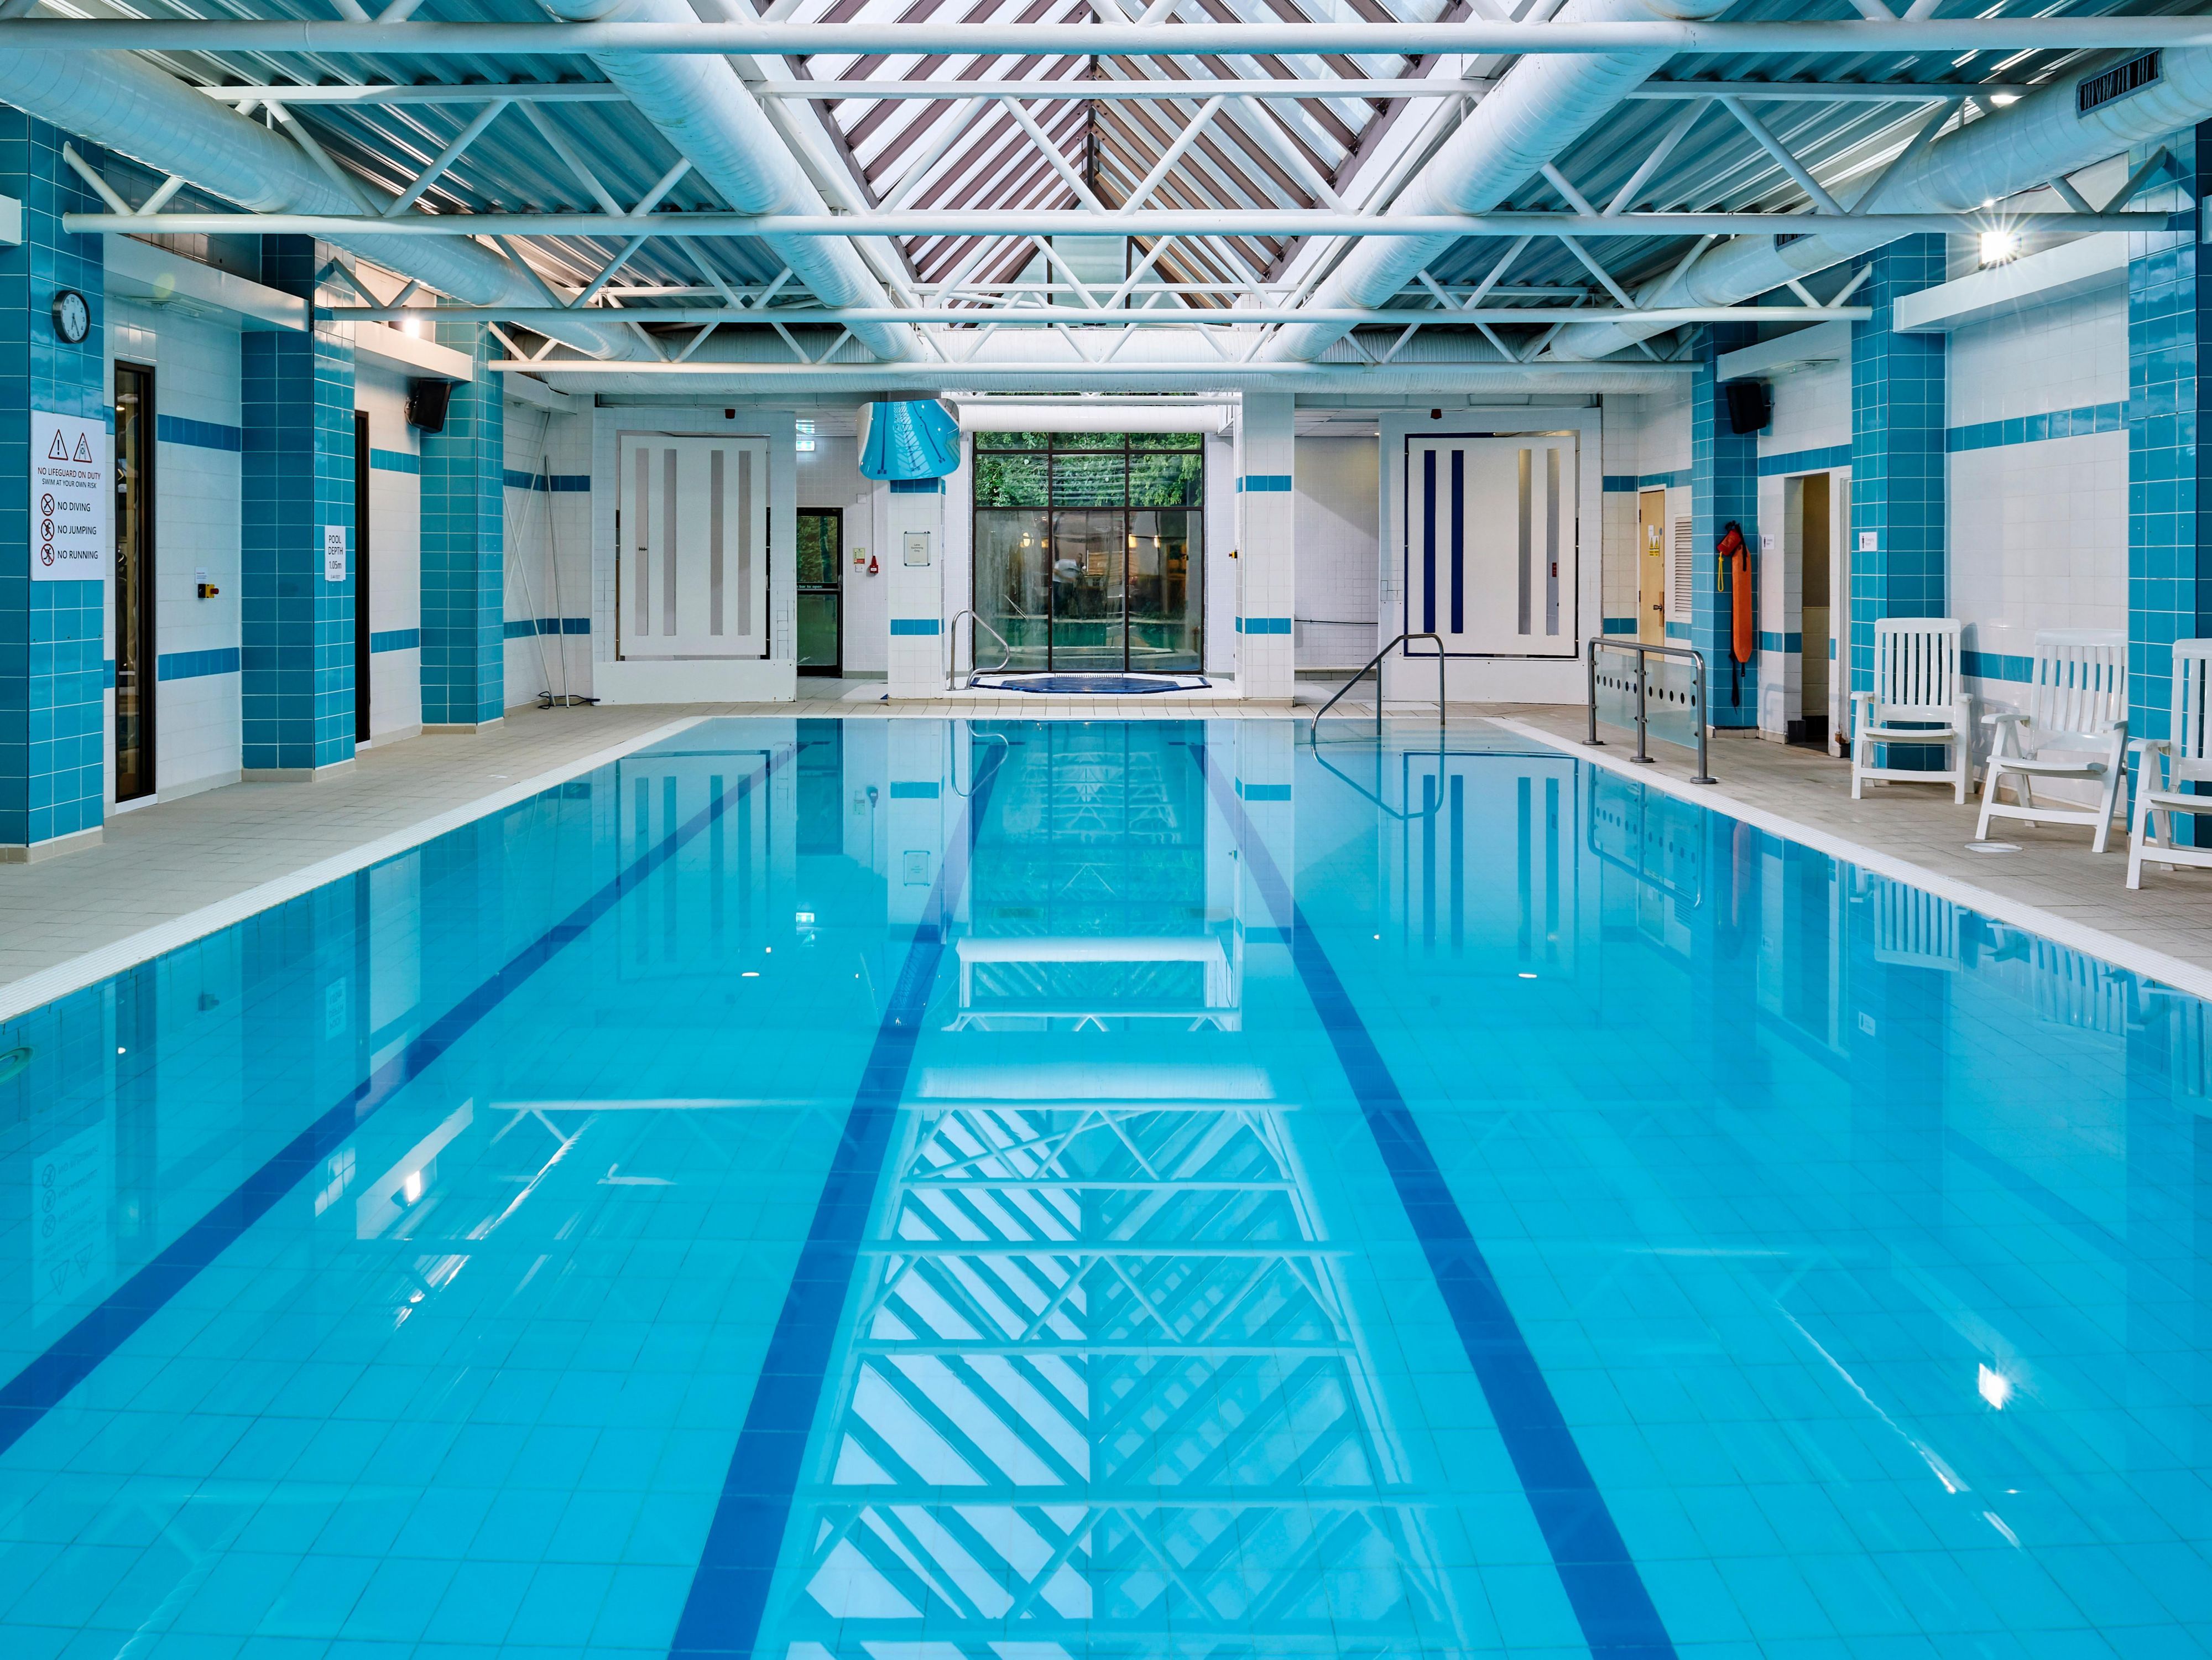 Guests can enjoy complimentary use of all the following facilities: fully-equipped gym, heated 15m swimming pool, jacuzzi, steam room, sauna and studio classes. Other services available at a additional cost include: beauty treatments and spa packages, personal training.  